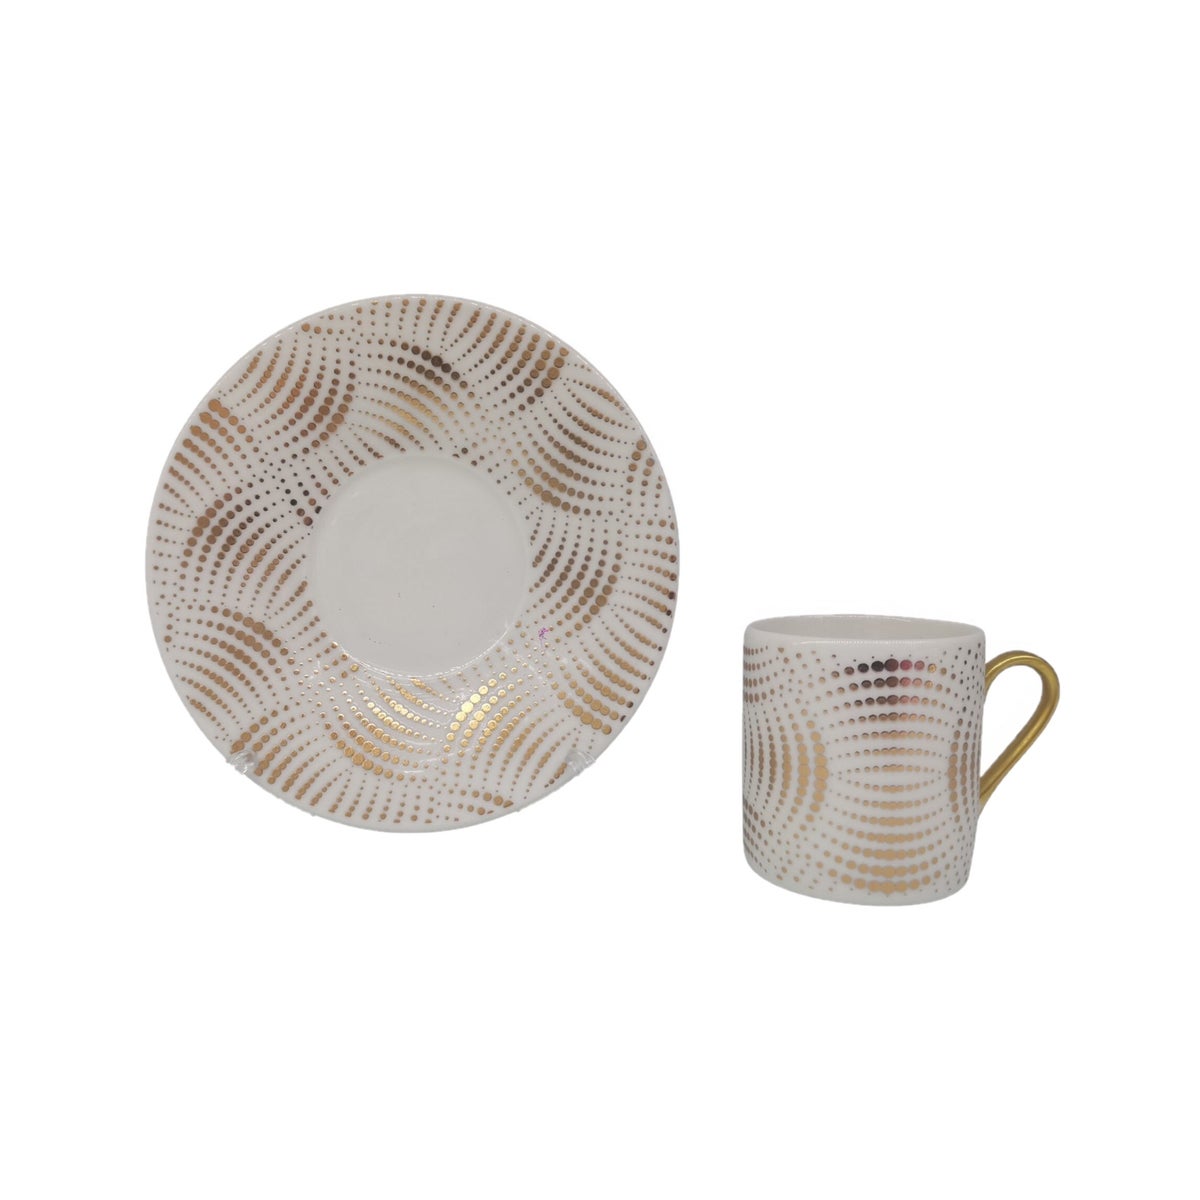 Coffee cup and Saucer 12pc Set 90cc white/Arc Gold Lines